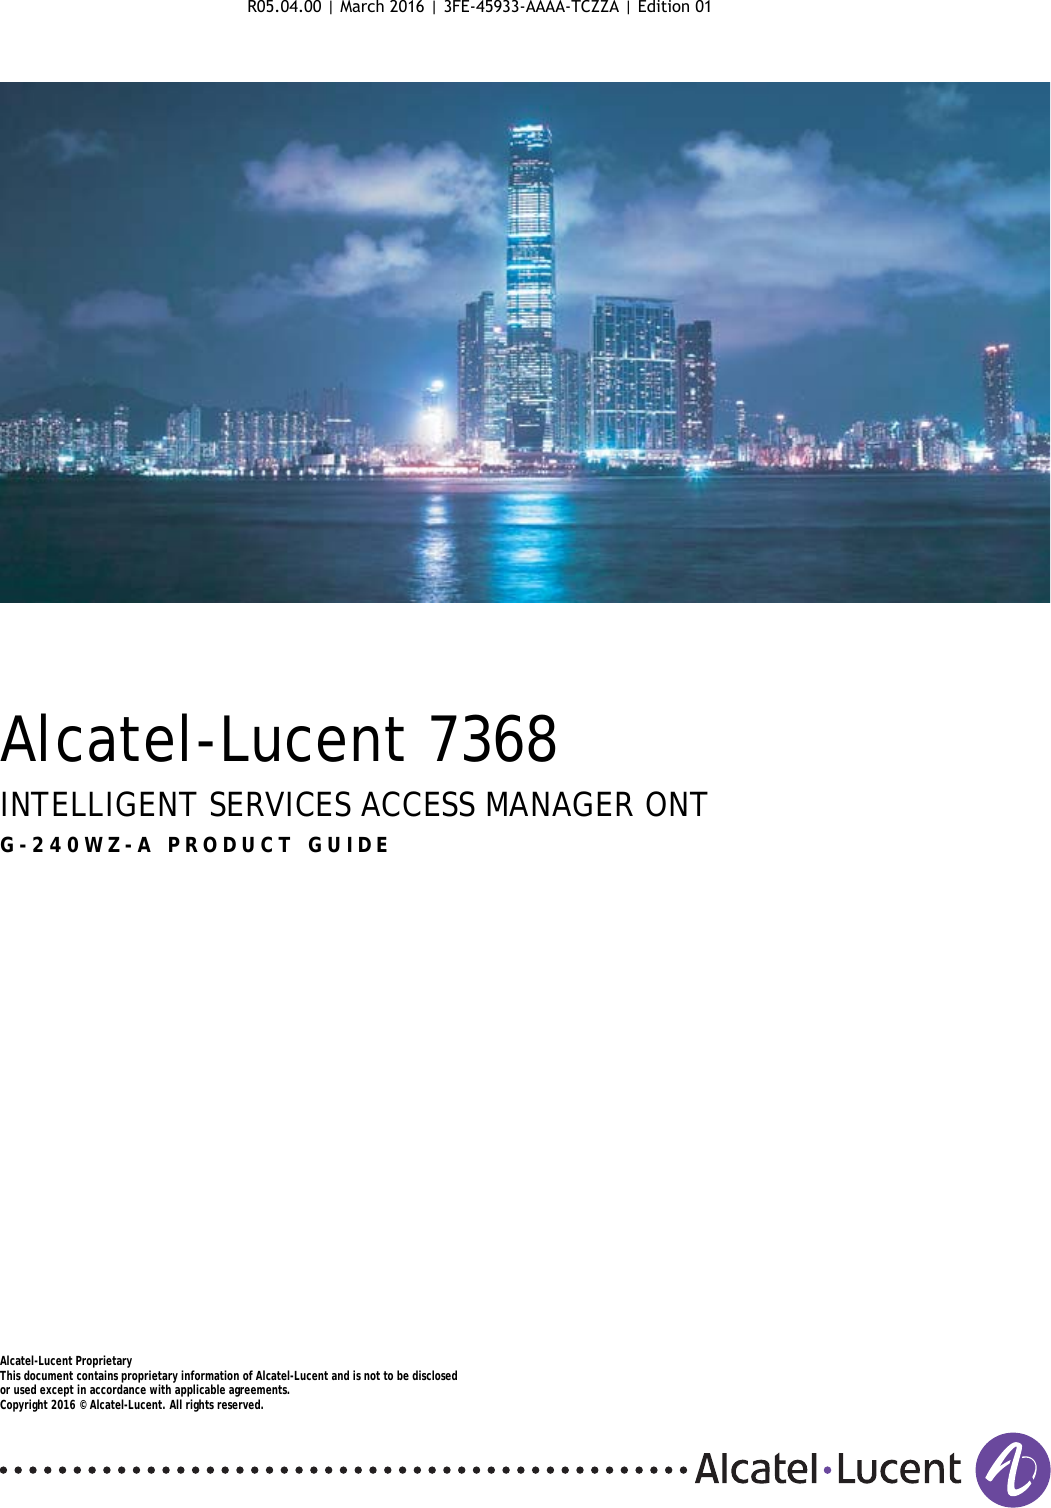 Alcatel-Lucent 7368INTELLIGENT SERVICES ACCESS MANAGER ONTG-240WZ-A PRODUCT GUIDEAlcatel-Lucent ProprietaryThis document contains proprietary information of Alcatel-Lucent and is not to be disclosedor used except in accordance with applicable agreements.Copyright 2016 © Alcatel-Lucent. All rights reserved.G-240WZ-A PRODUCT GUIDER05.04.00 | March 2016 | 3FE-45933-AAAA-TCZZA | Edition 01 